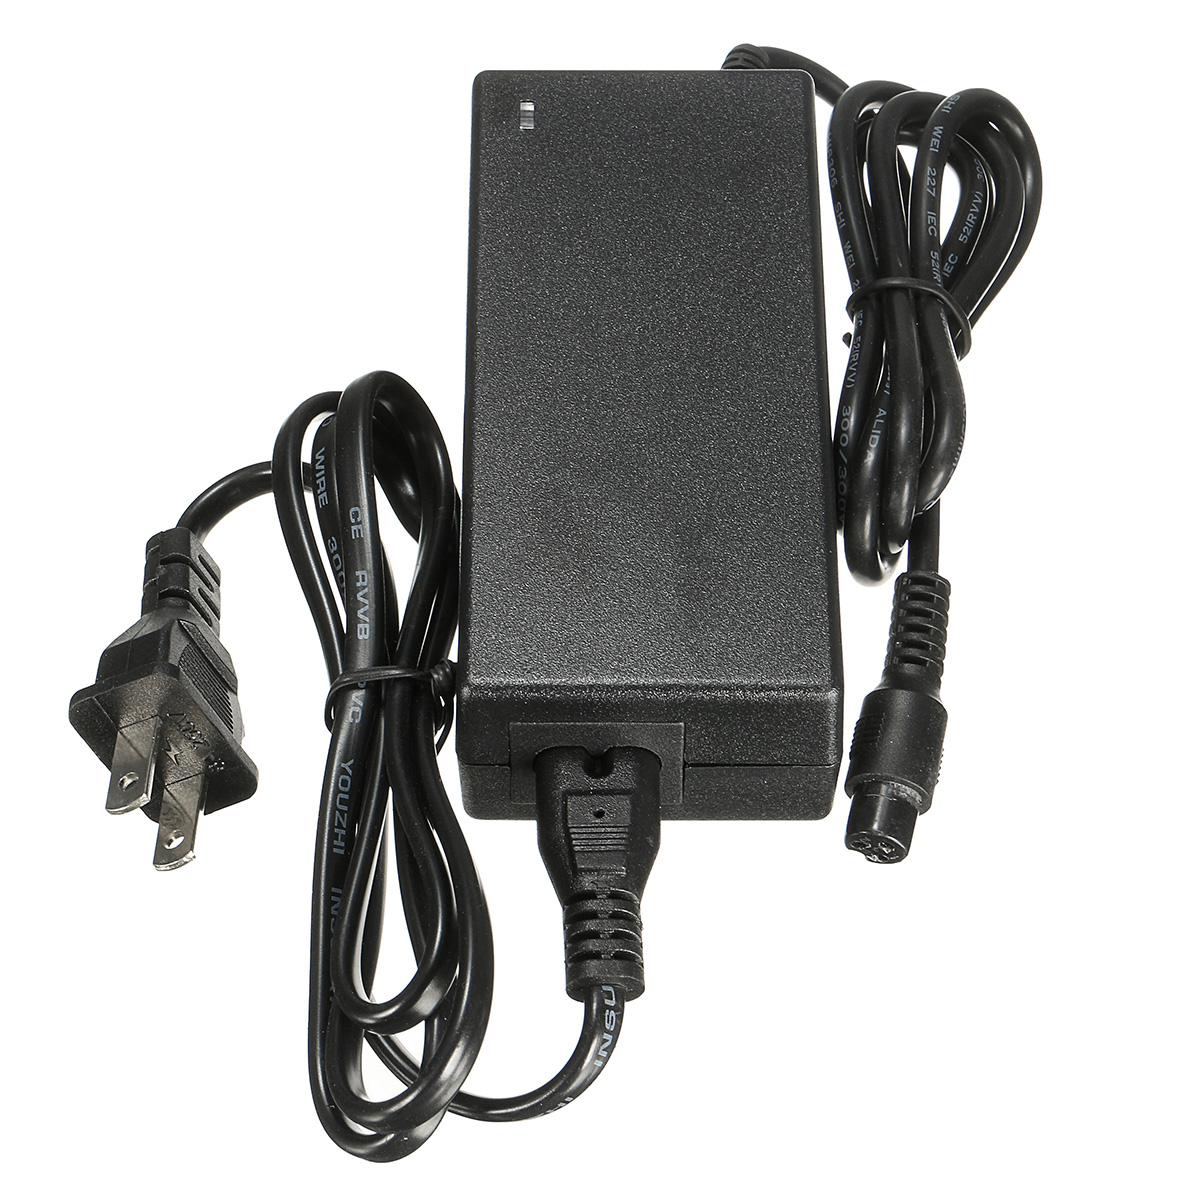 Lot 42V 2A AC DC Power Adapter Battery Charger for Smart Balancing Scooter US